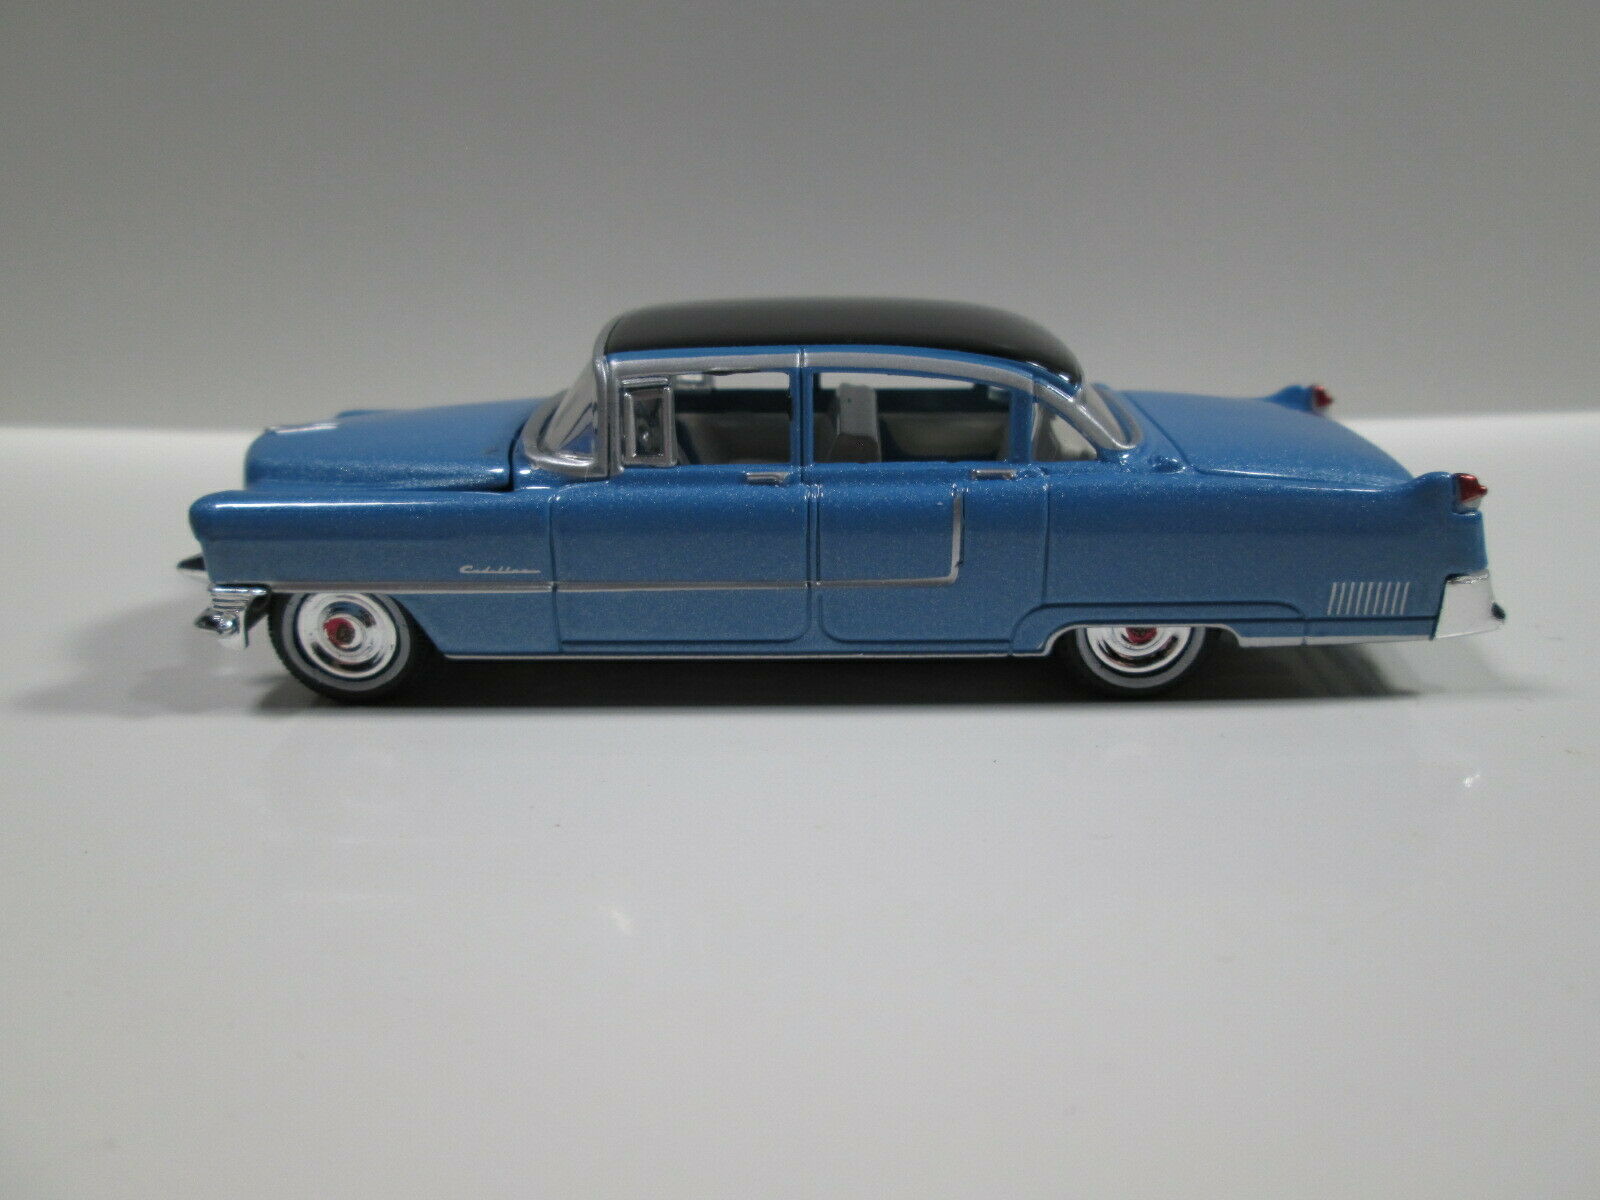 1955 Cadillac Fleetwood  Blue  S Scale Die-cast